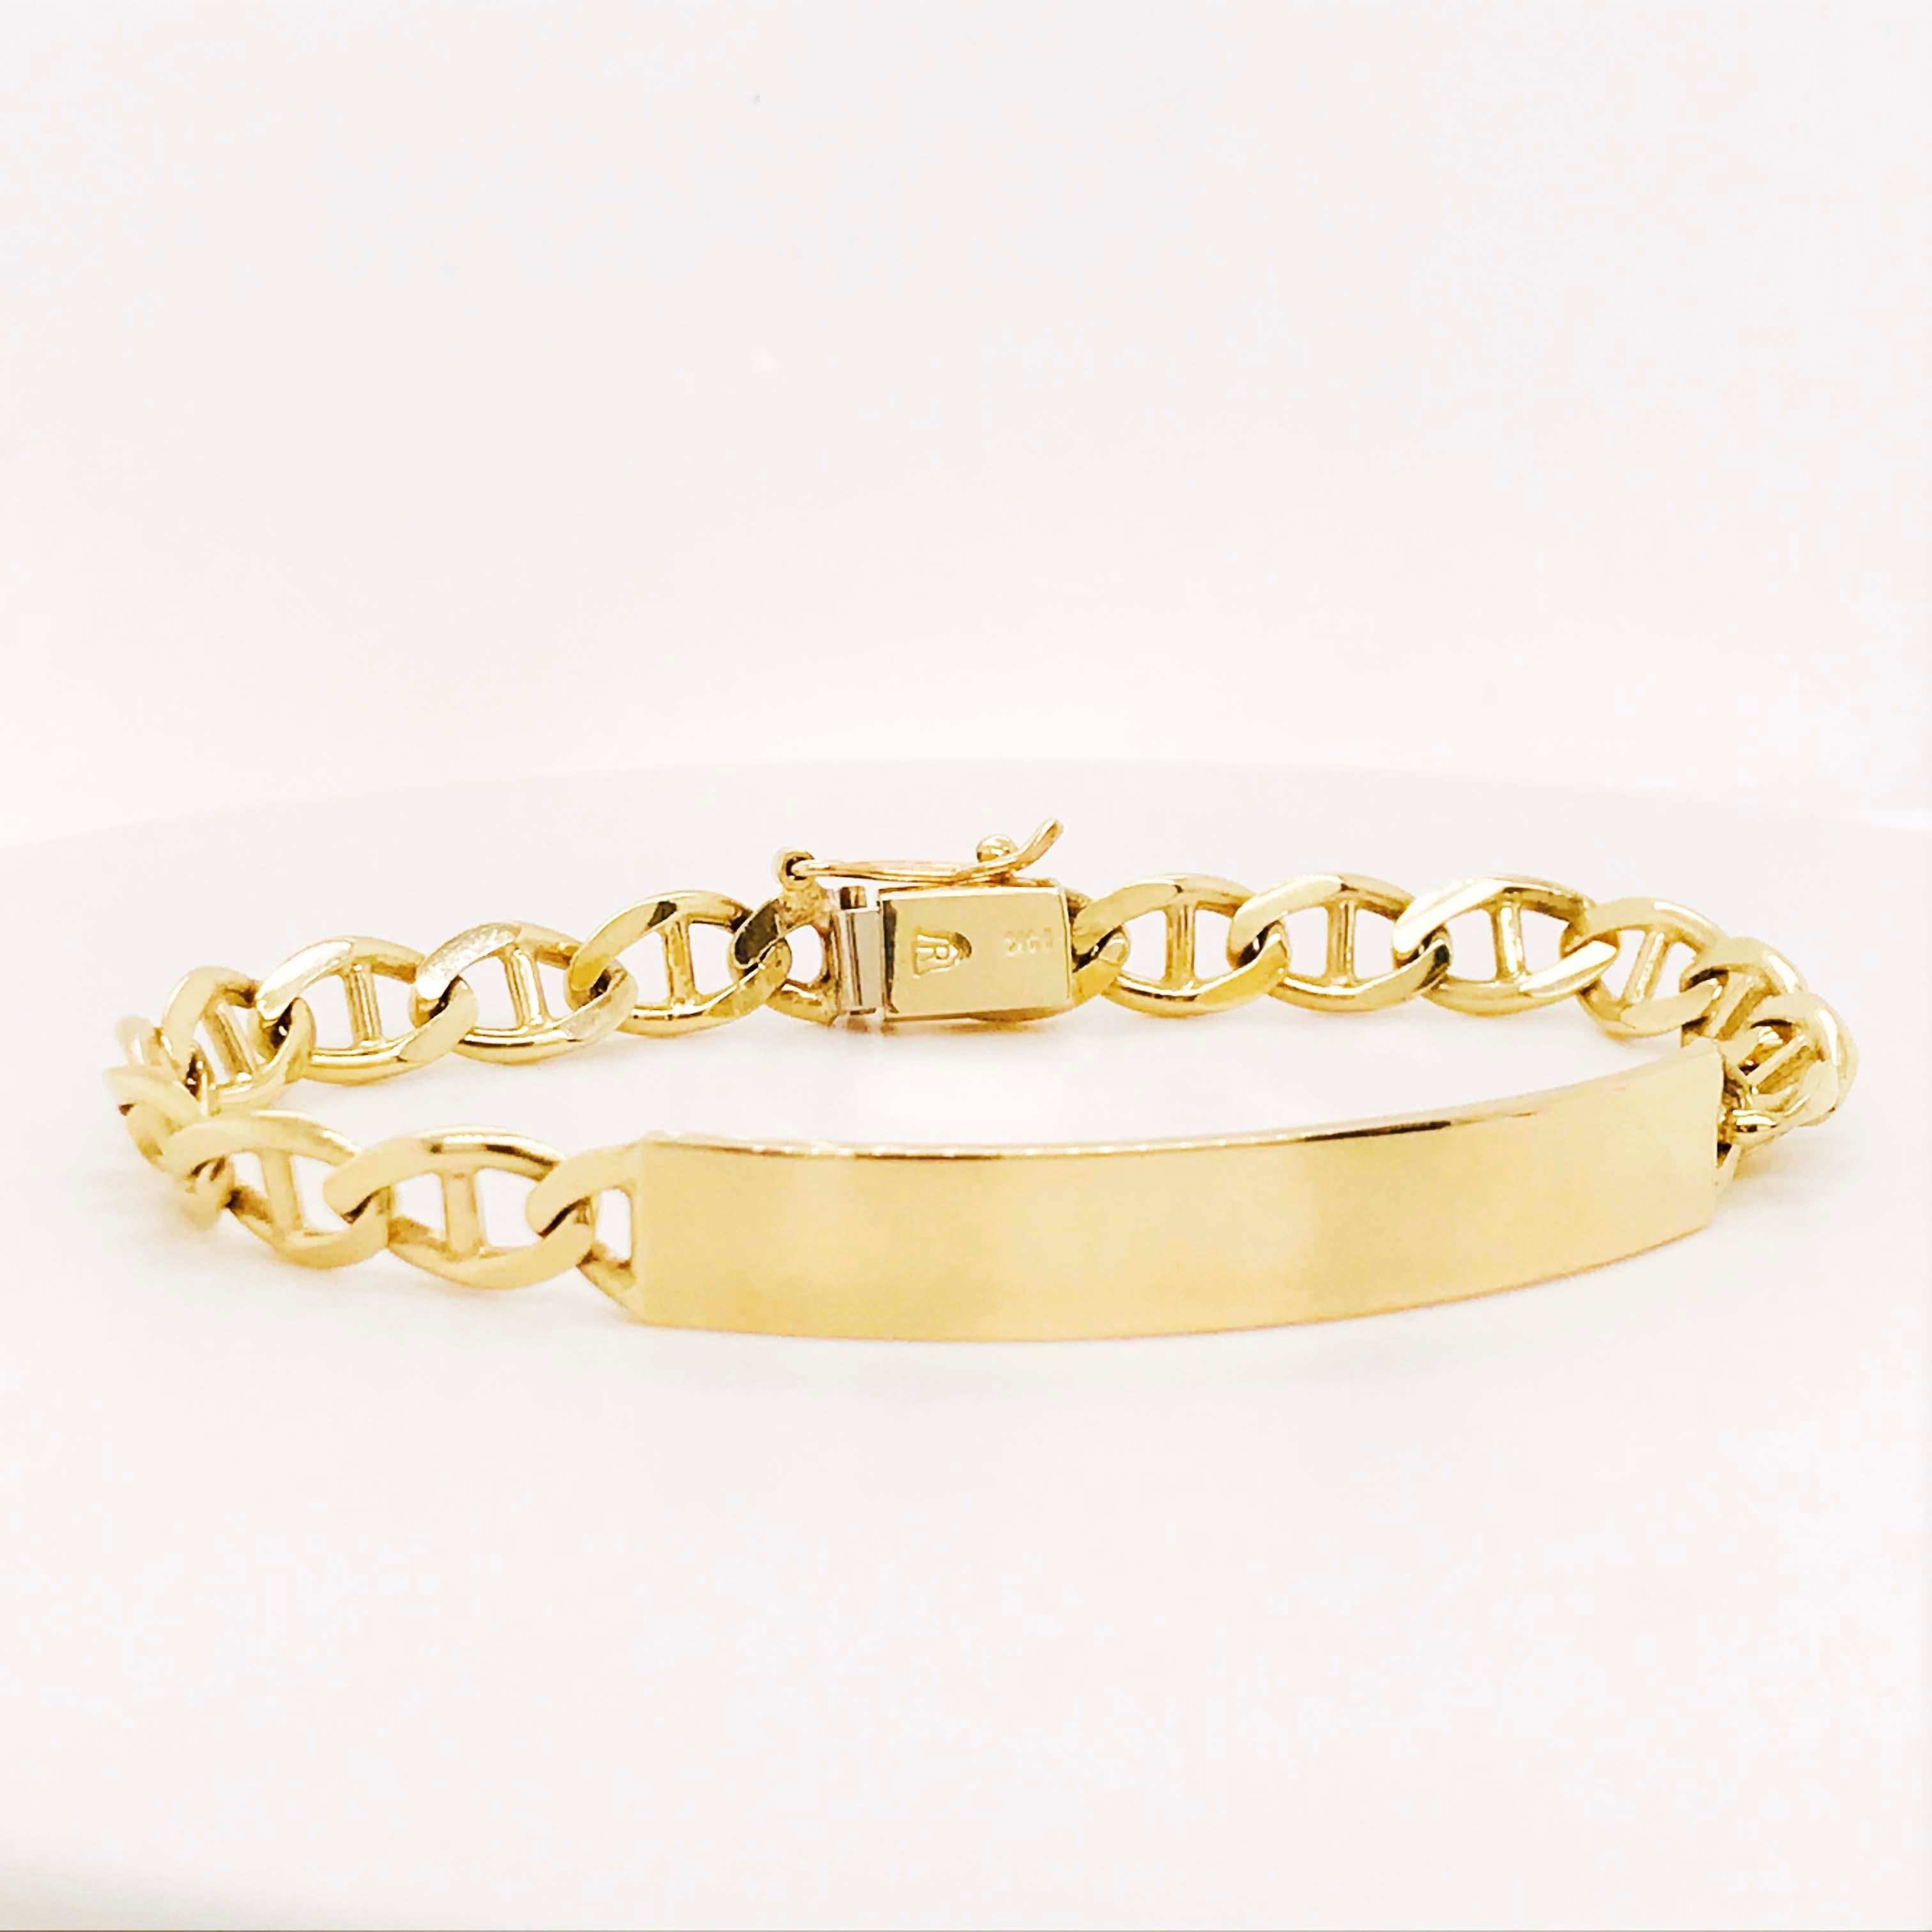 Modern Engravable ID Bracelet in 14 kt Gold with Anchor Link Chain for Men or LG Woman